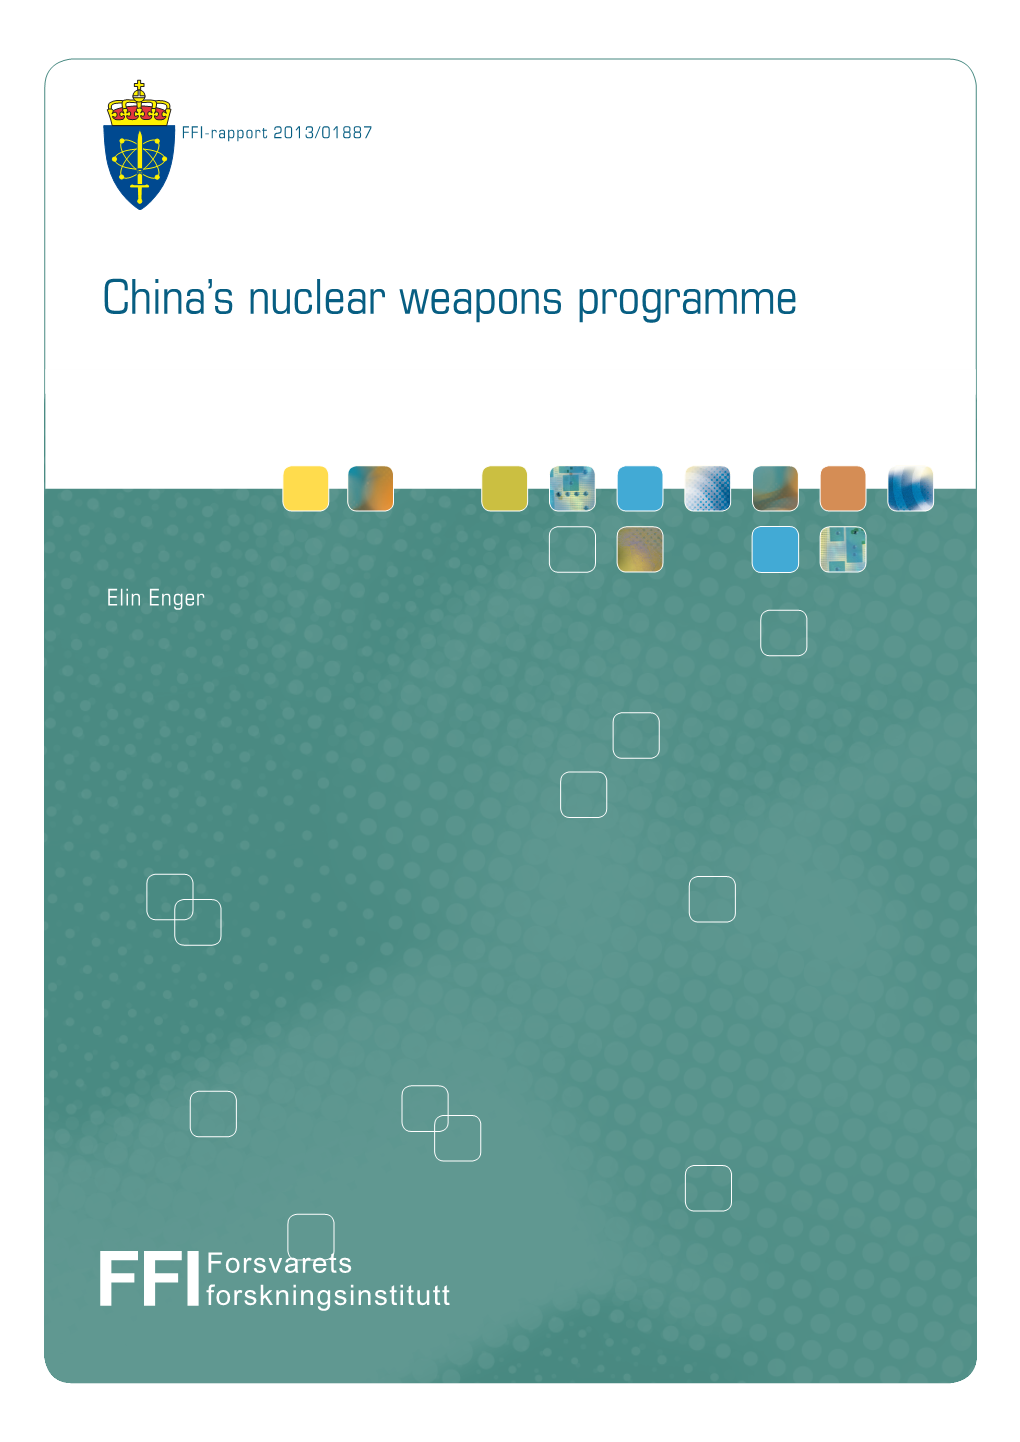 Chinese Tests of Modern Nuclear Weapon Types 23 8.1.1 the Neutron Bomb, W-70 24 8.1.2 Modern, Small Thermonuclear Warheads, W-88 25